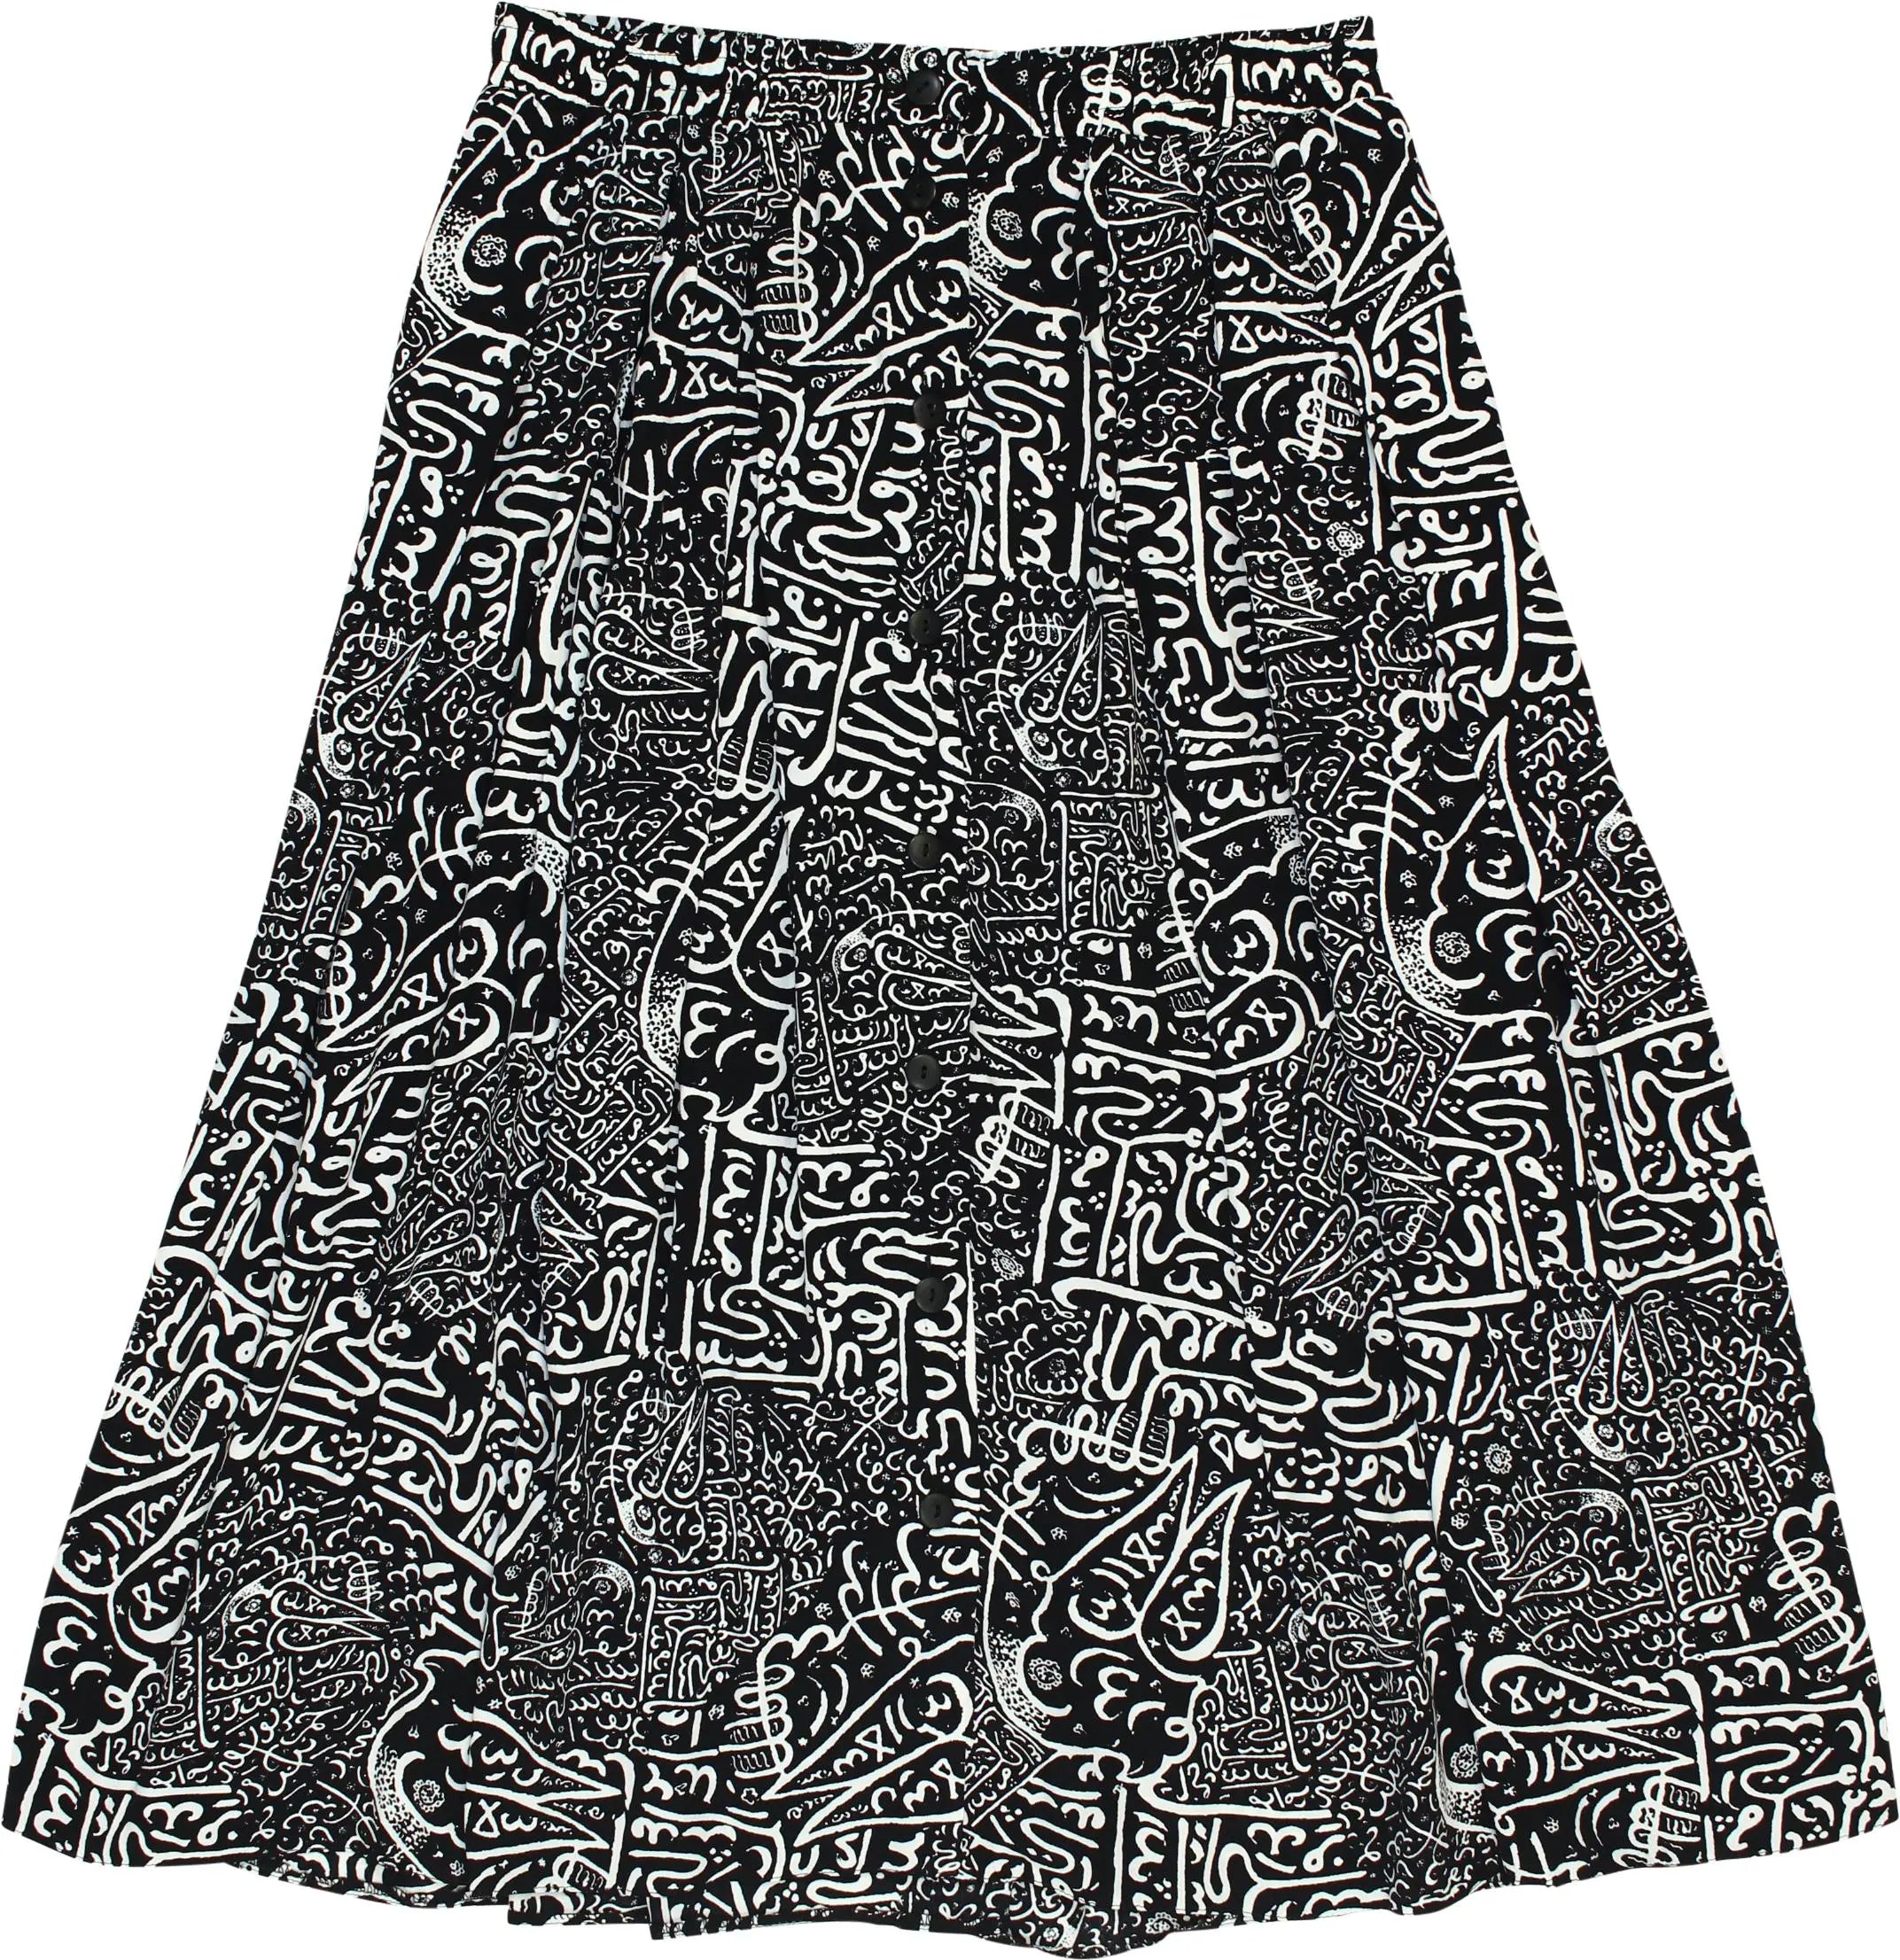 Toni Dress - 90s Black & White Patterned Skirt- ThriftTale.com - Vintage and second handclothing